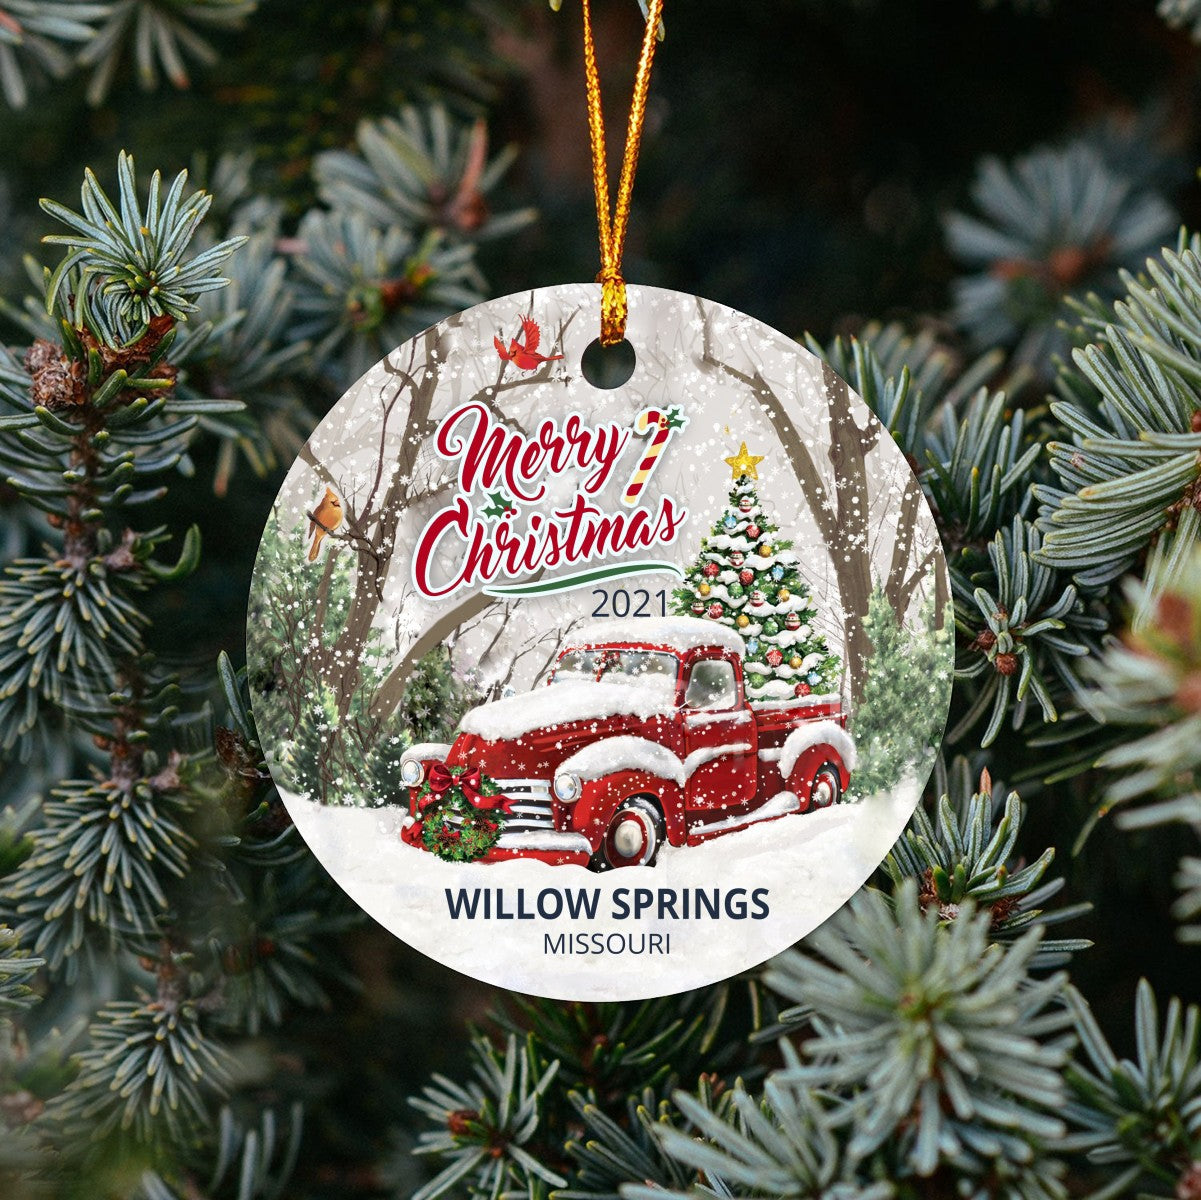 Christmas Tree Ornaments Willow Springs - Ornament With Name City, State Willow Springs Missouri MO Ornament - Red Truck Xmas Ornaments 3'' Plastic Gift For Family, Friend And Housewarming